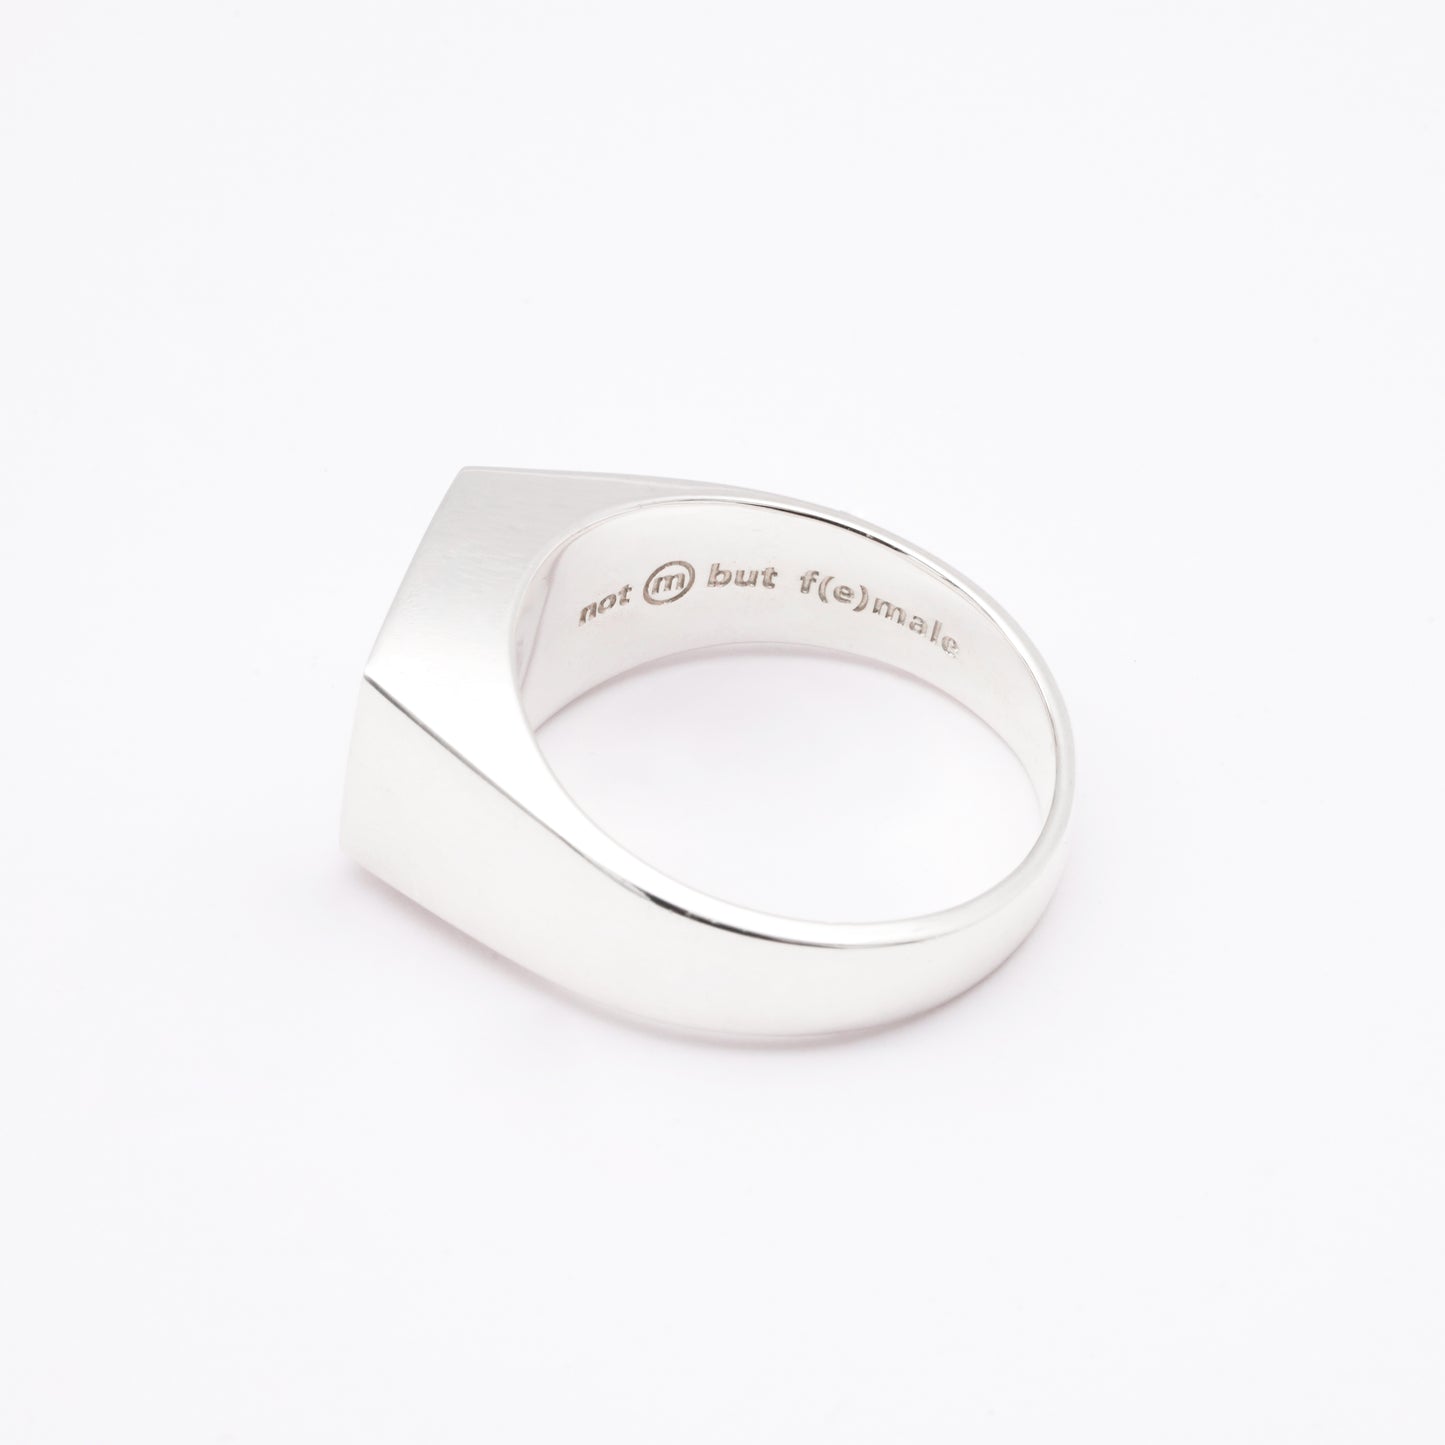 number square ring